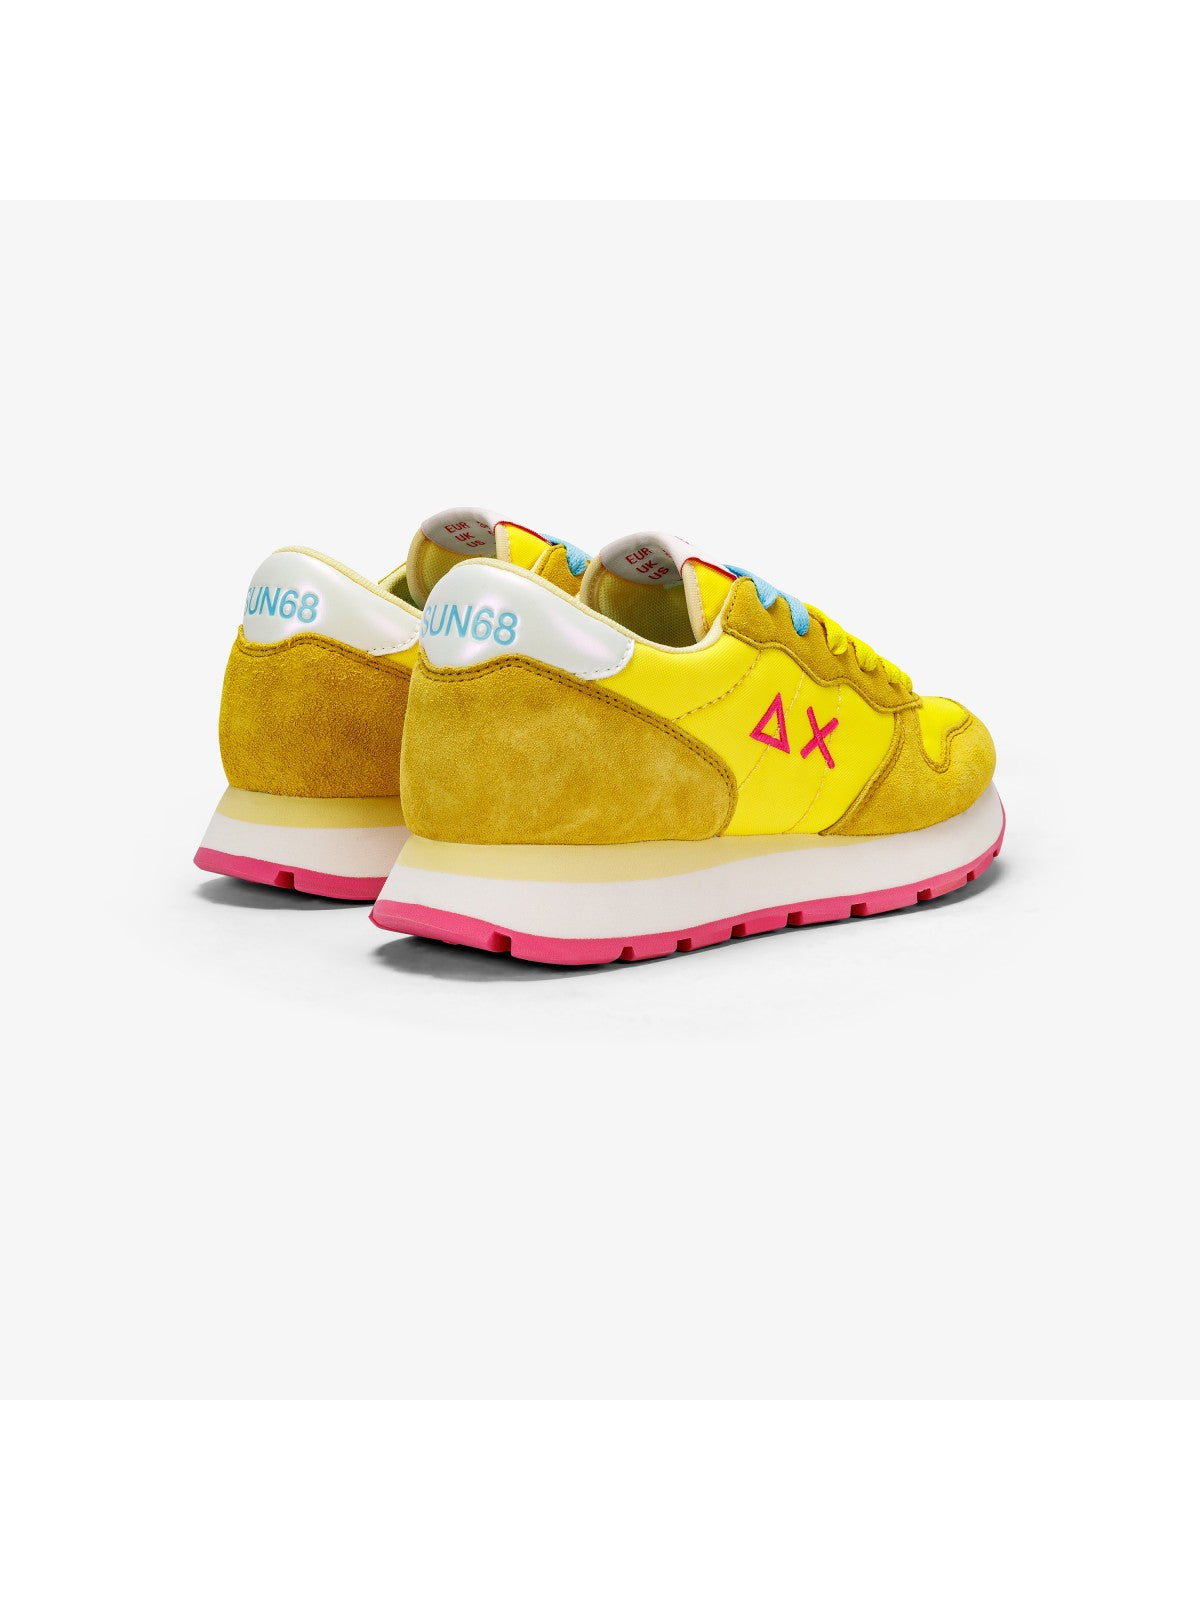 SUN68 Baskets pour femmes Ally solid nylon Z34201 23 Yellow